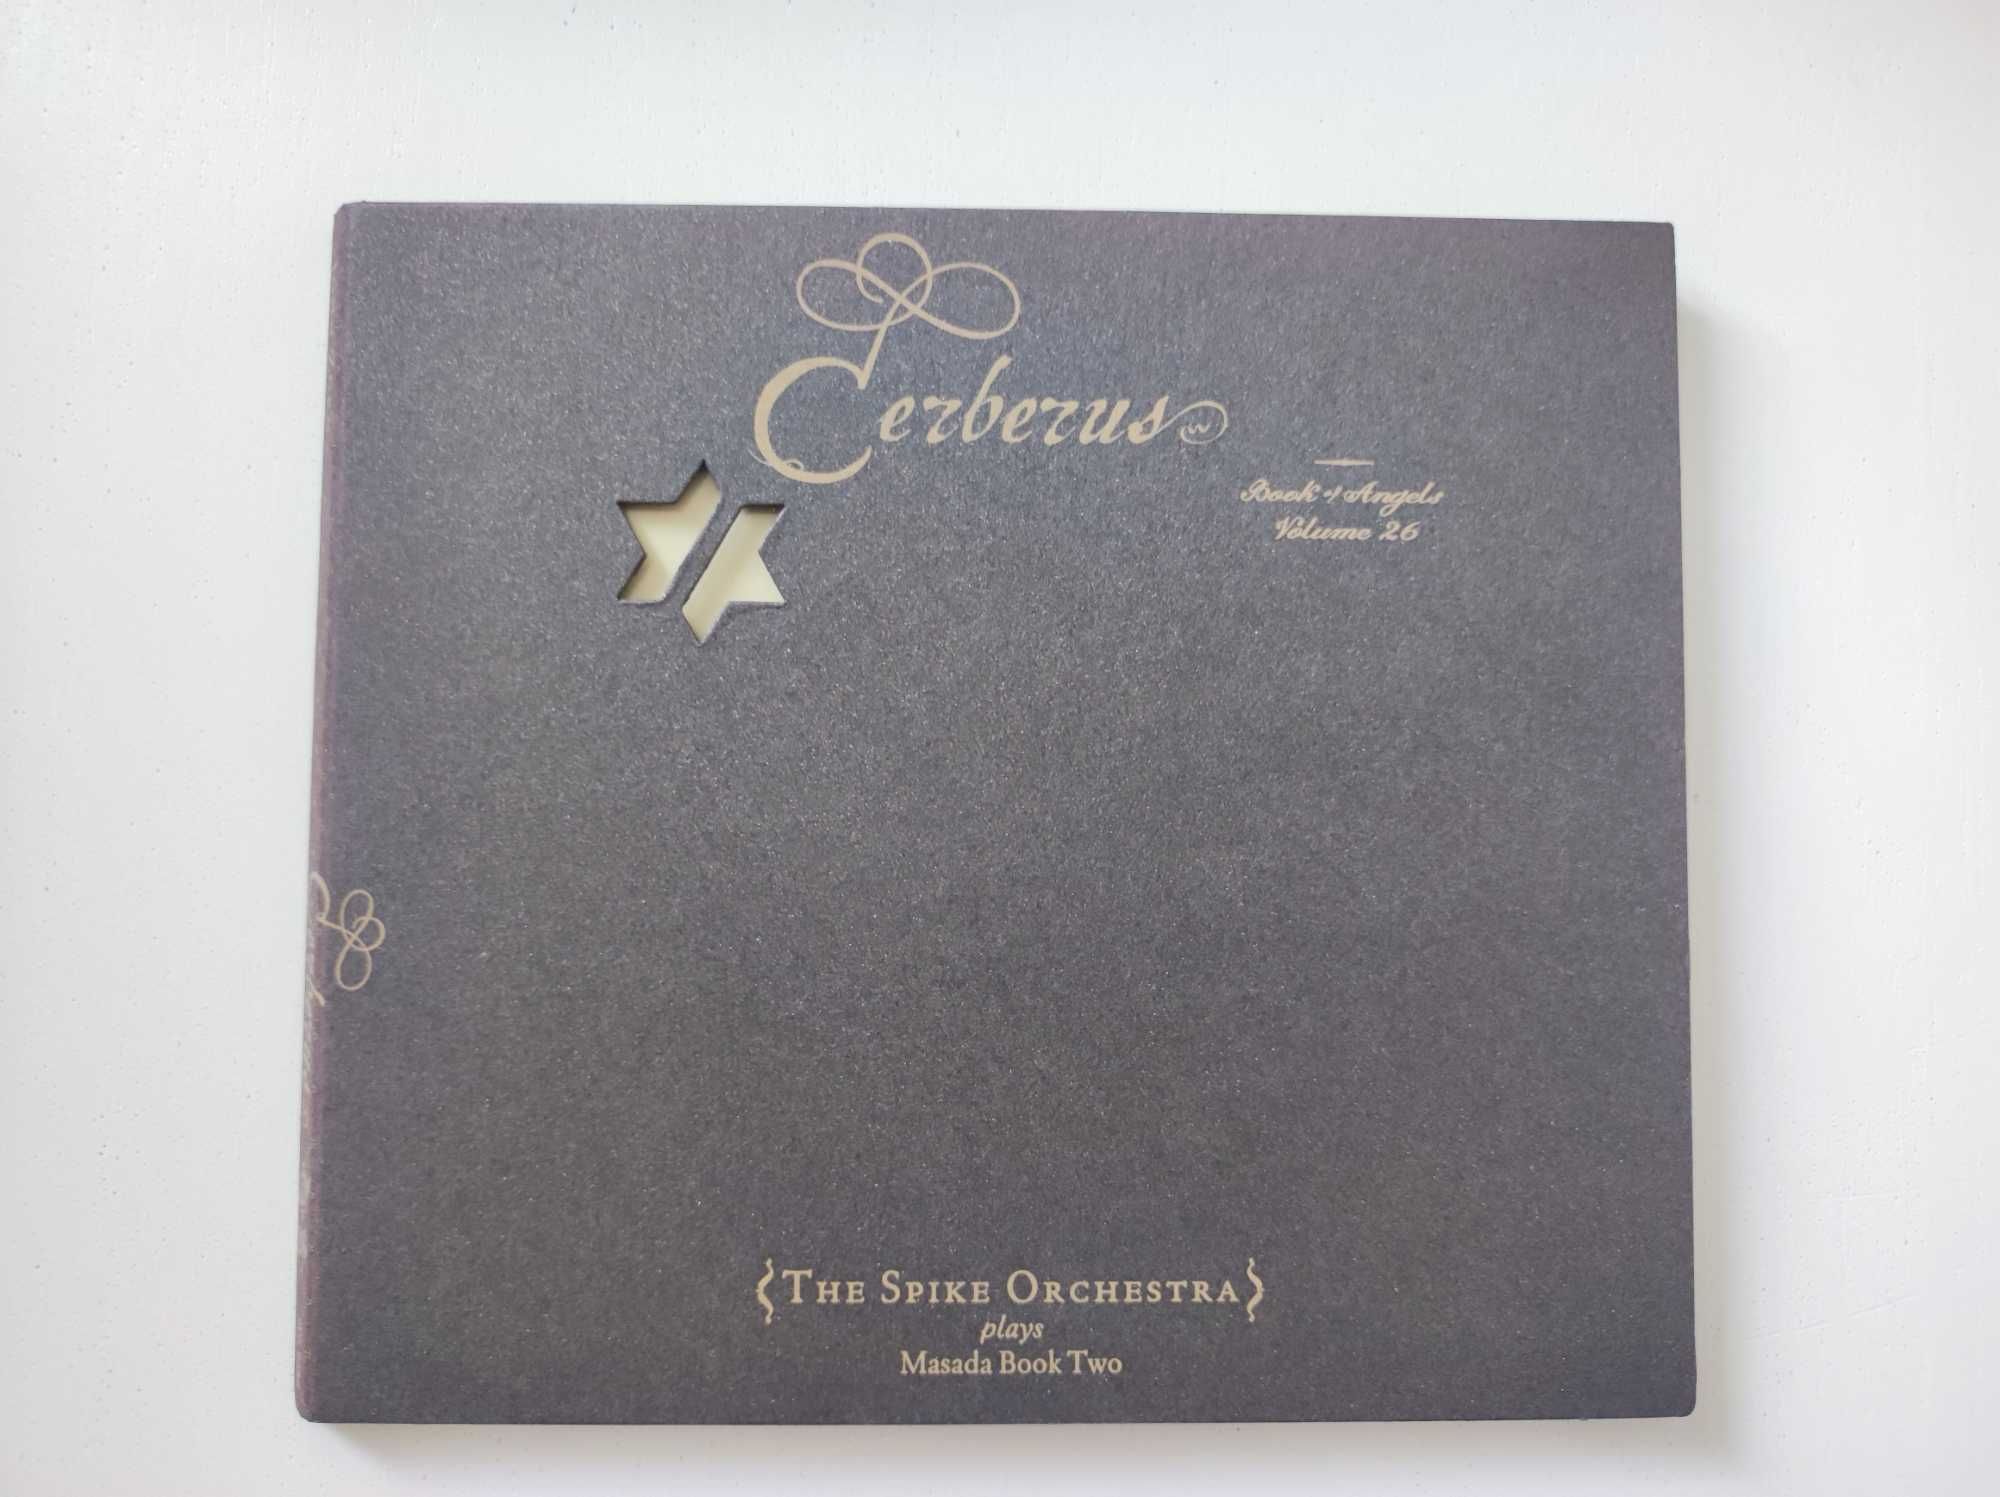 John Zorn, The Spike Orchestra - Cerberus: The Book of Angels Vol 26